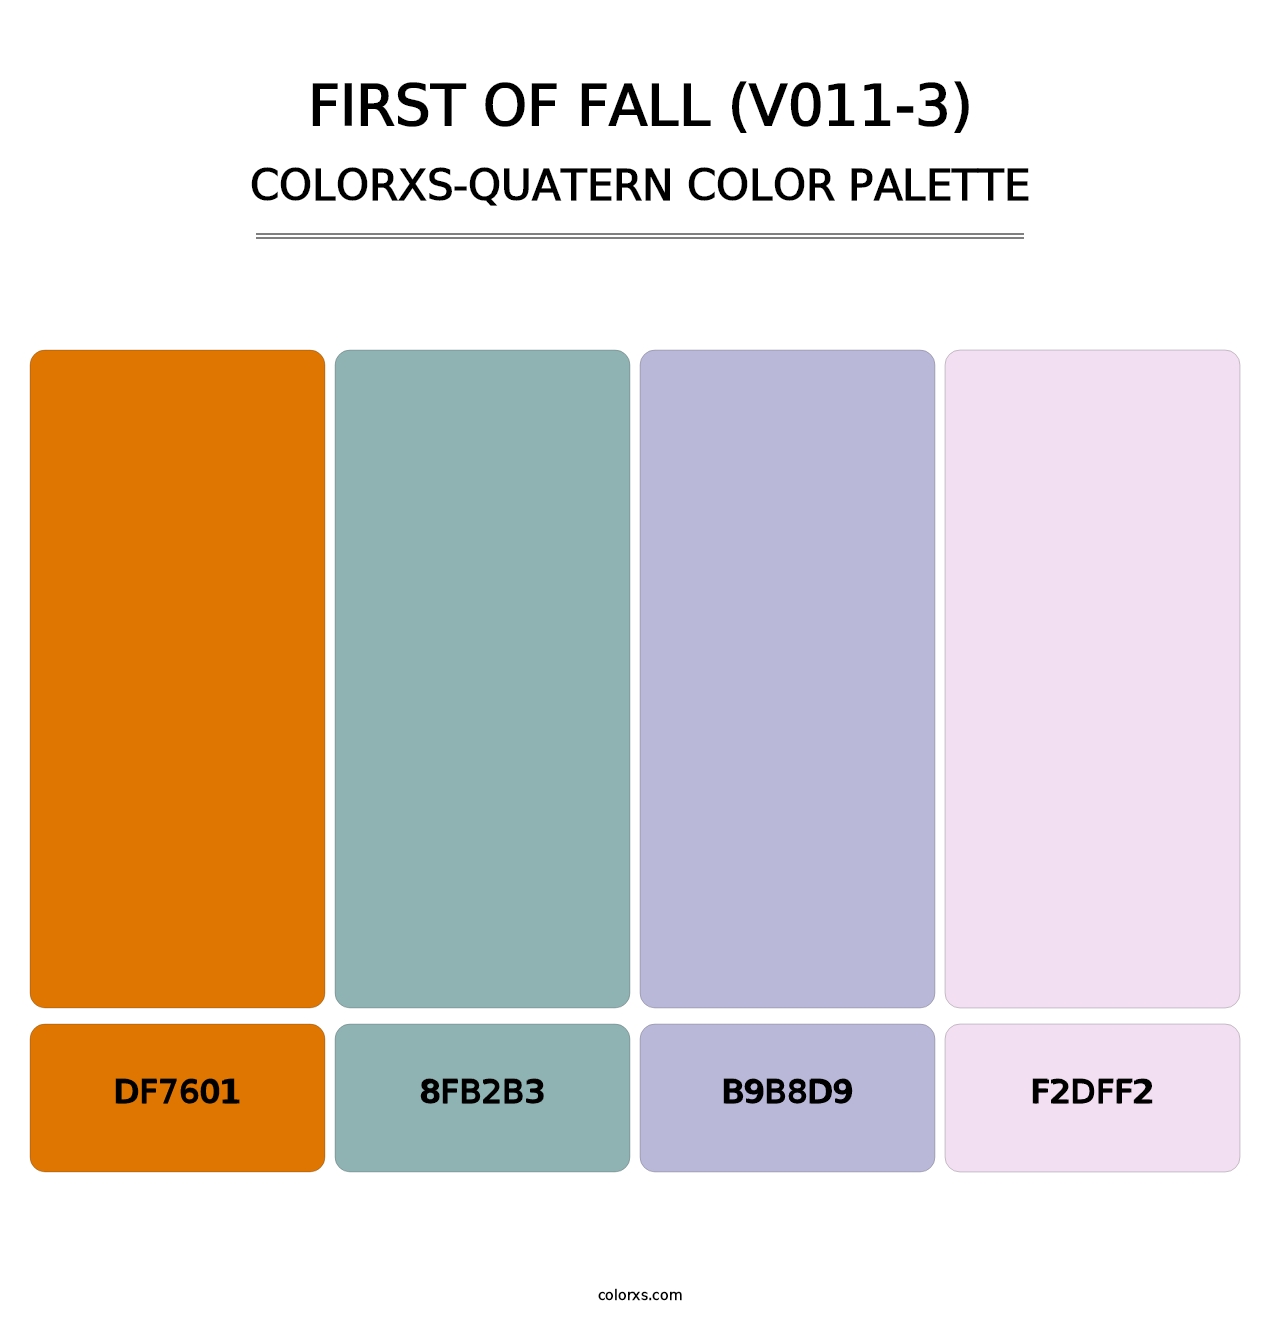 First of Fall (V011-3) - Colorxs Quatern Palette